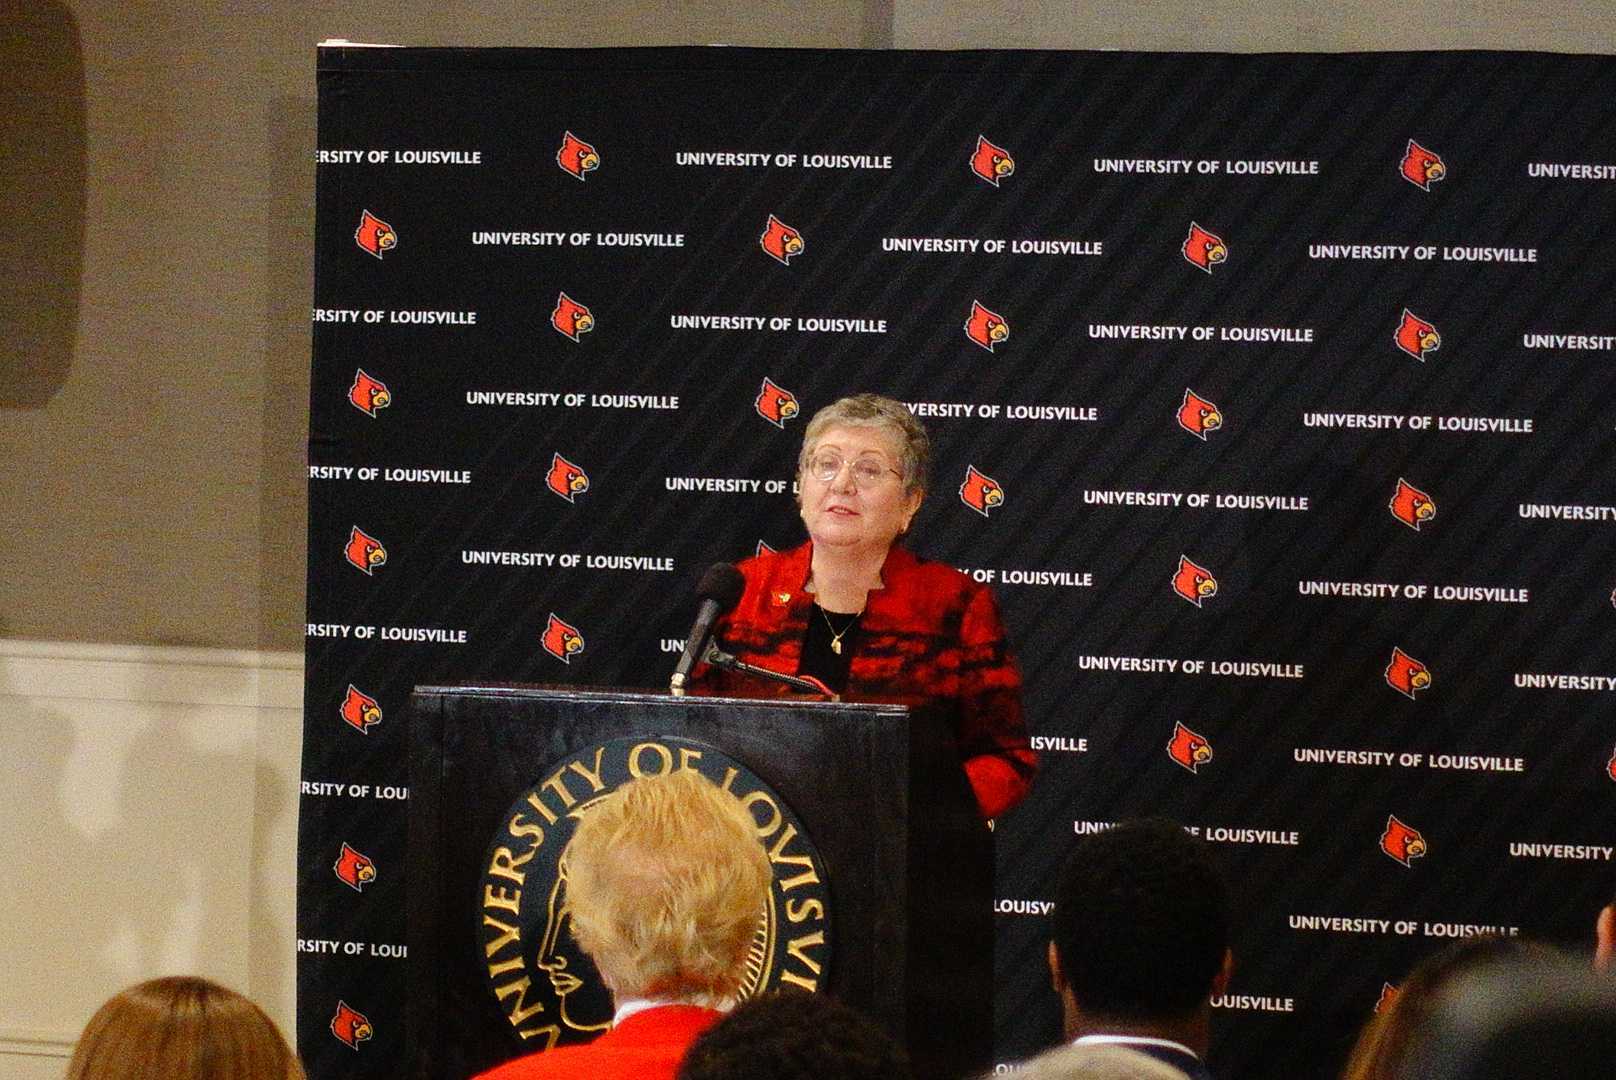 The University of Louisville officially inaugurates 19th President Dr. Kim  Schatzel – The Louisville Cardinal